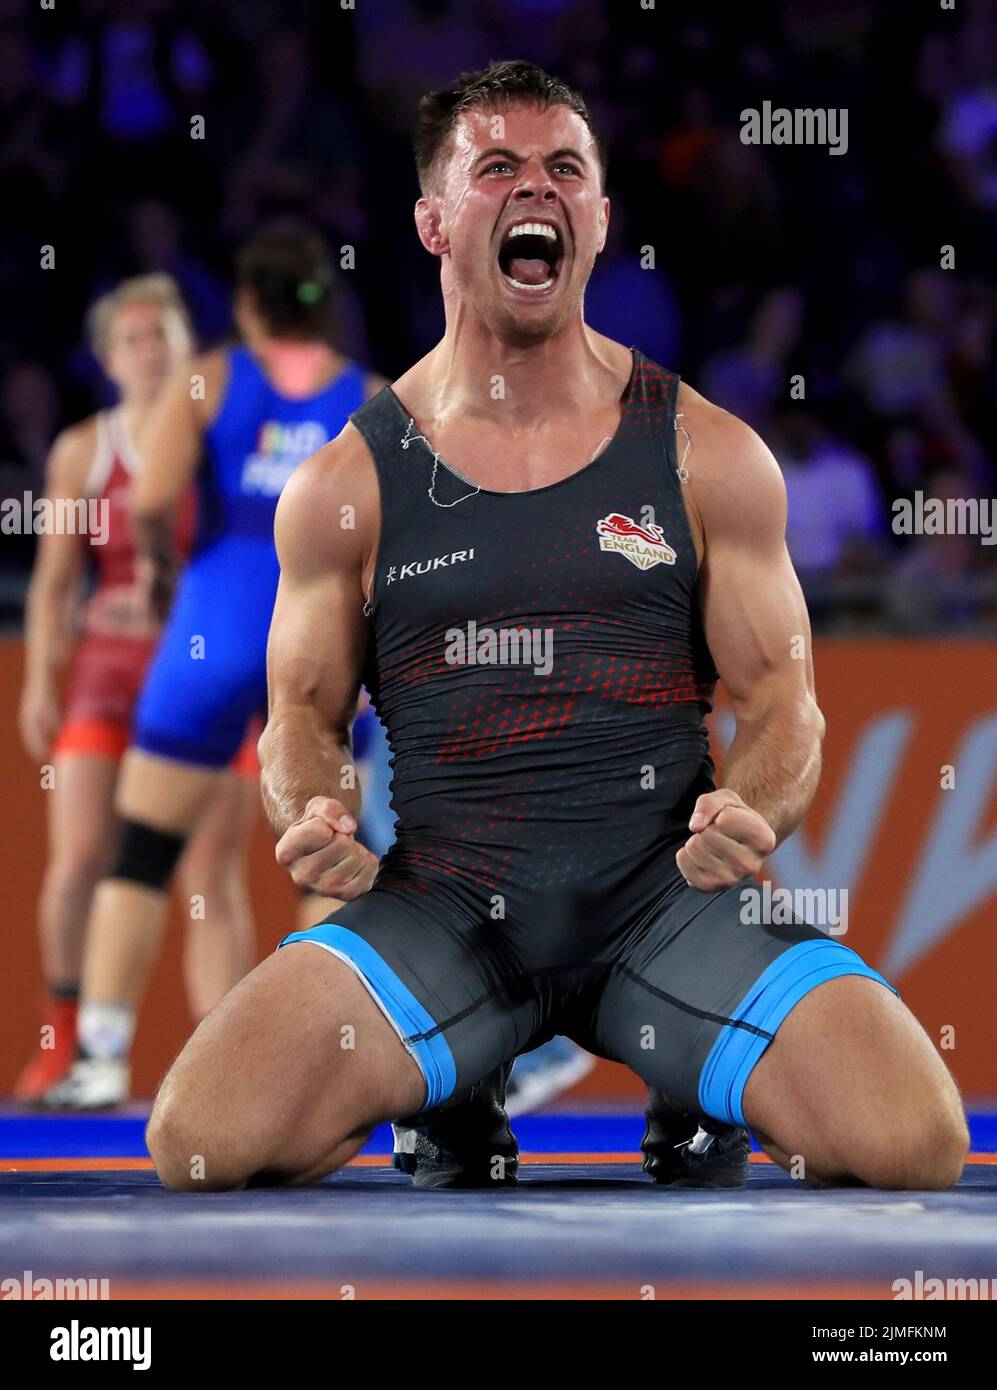 England’s Charlie Bowling celebrates winning against South Africa’s Arno van Zijl in the Men’s Freestyle 74kg Quarter Final at the Coventry Arena on day nine of the 2022 Commonwealth Games. Picture date: Saturday August 6, 2022. Stock Photo